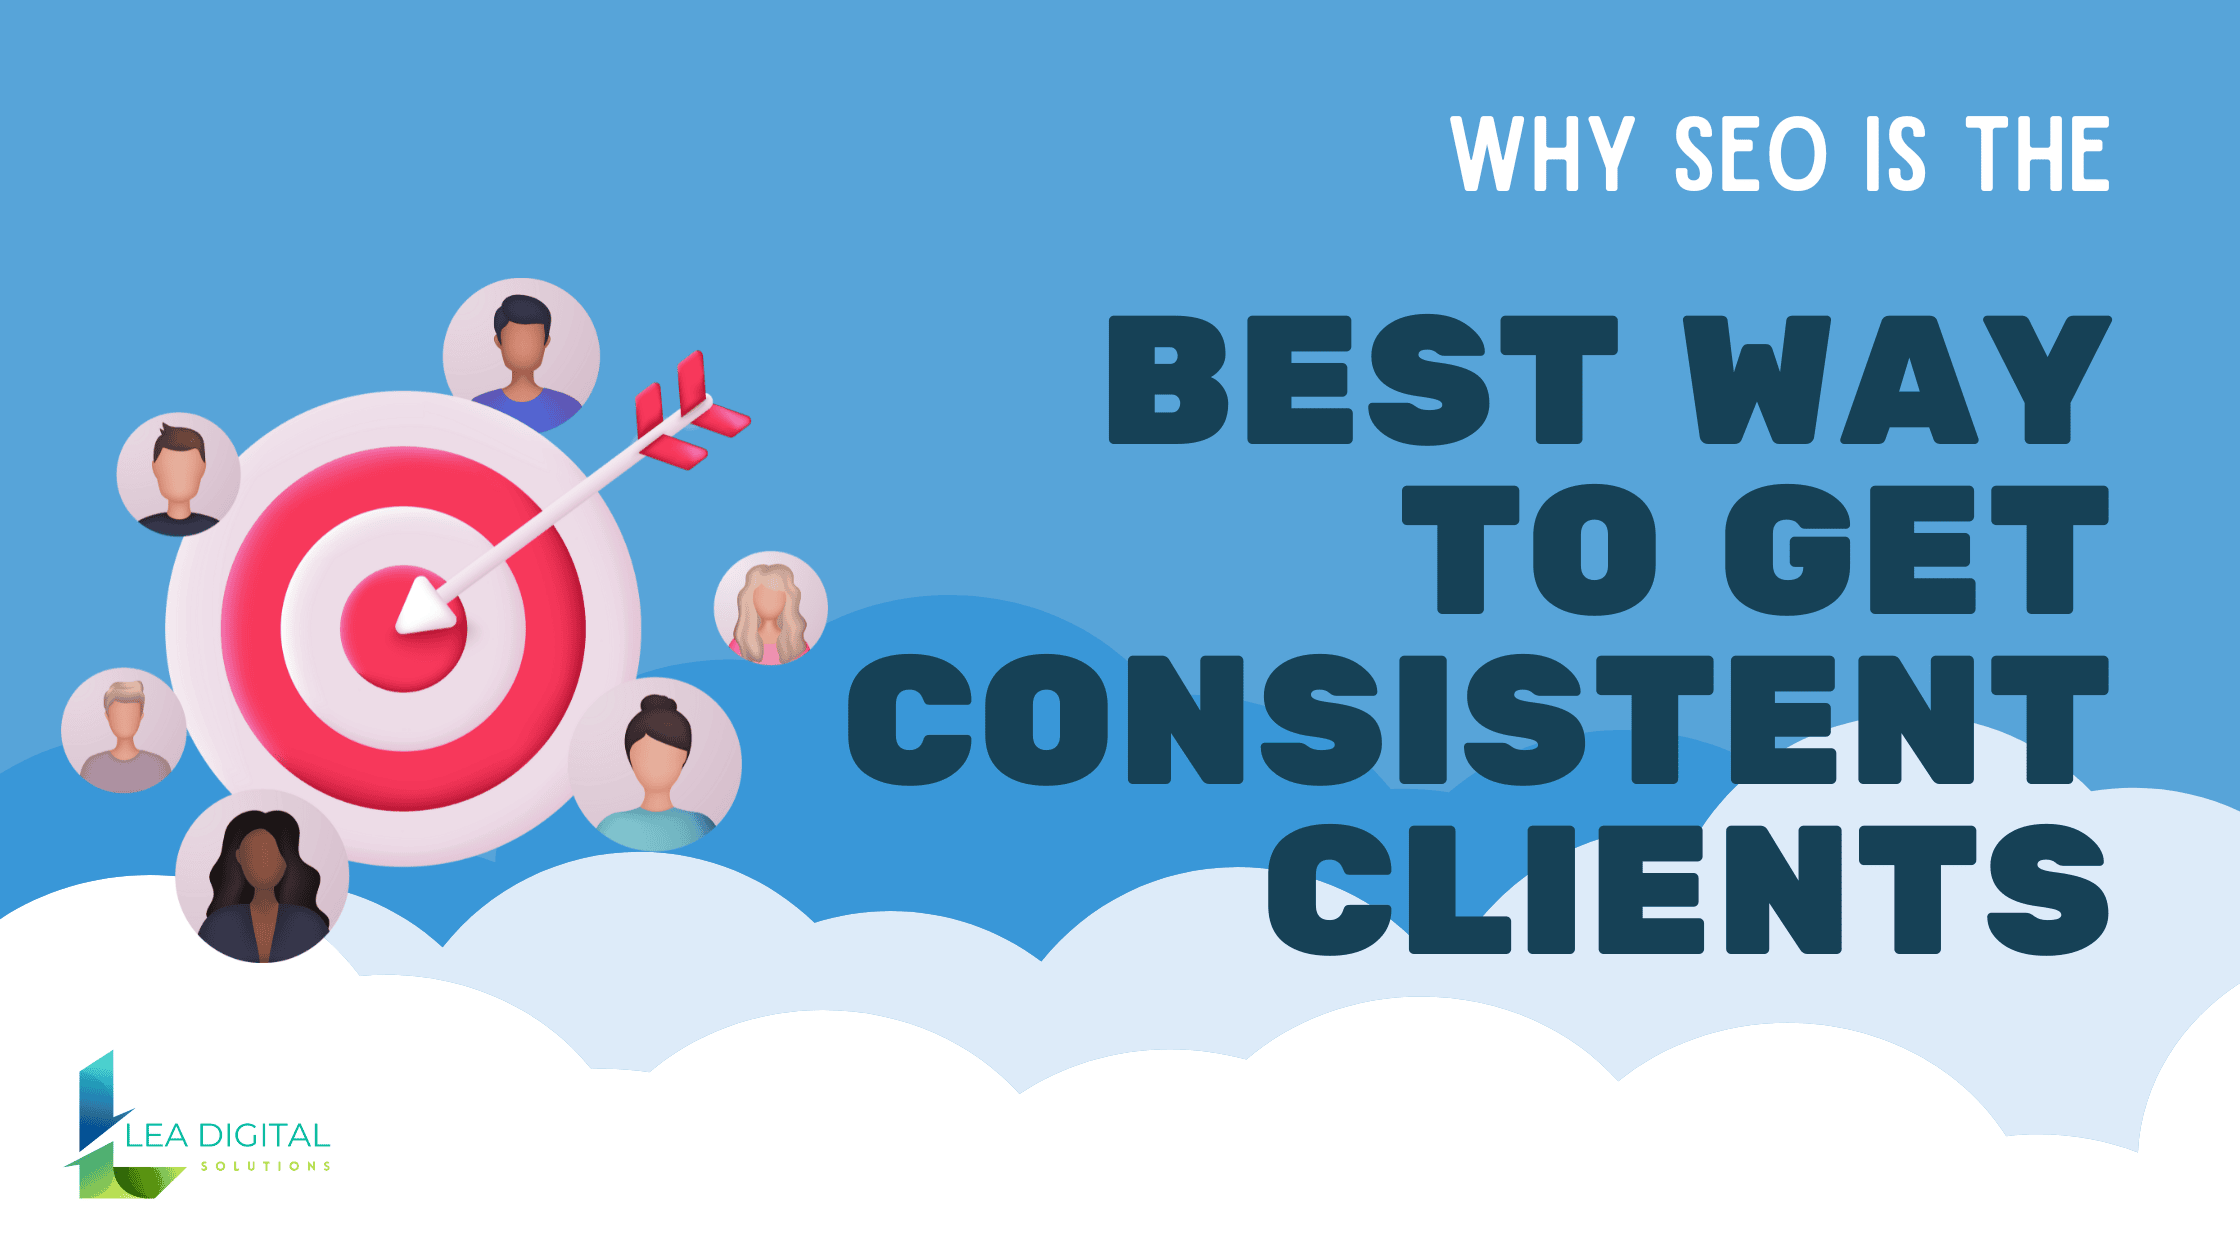 seo is the best way to get consistent clients